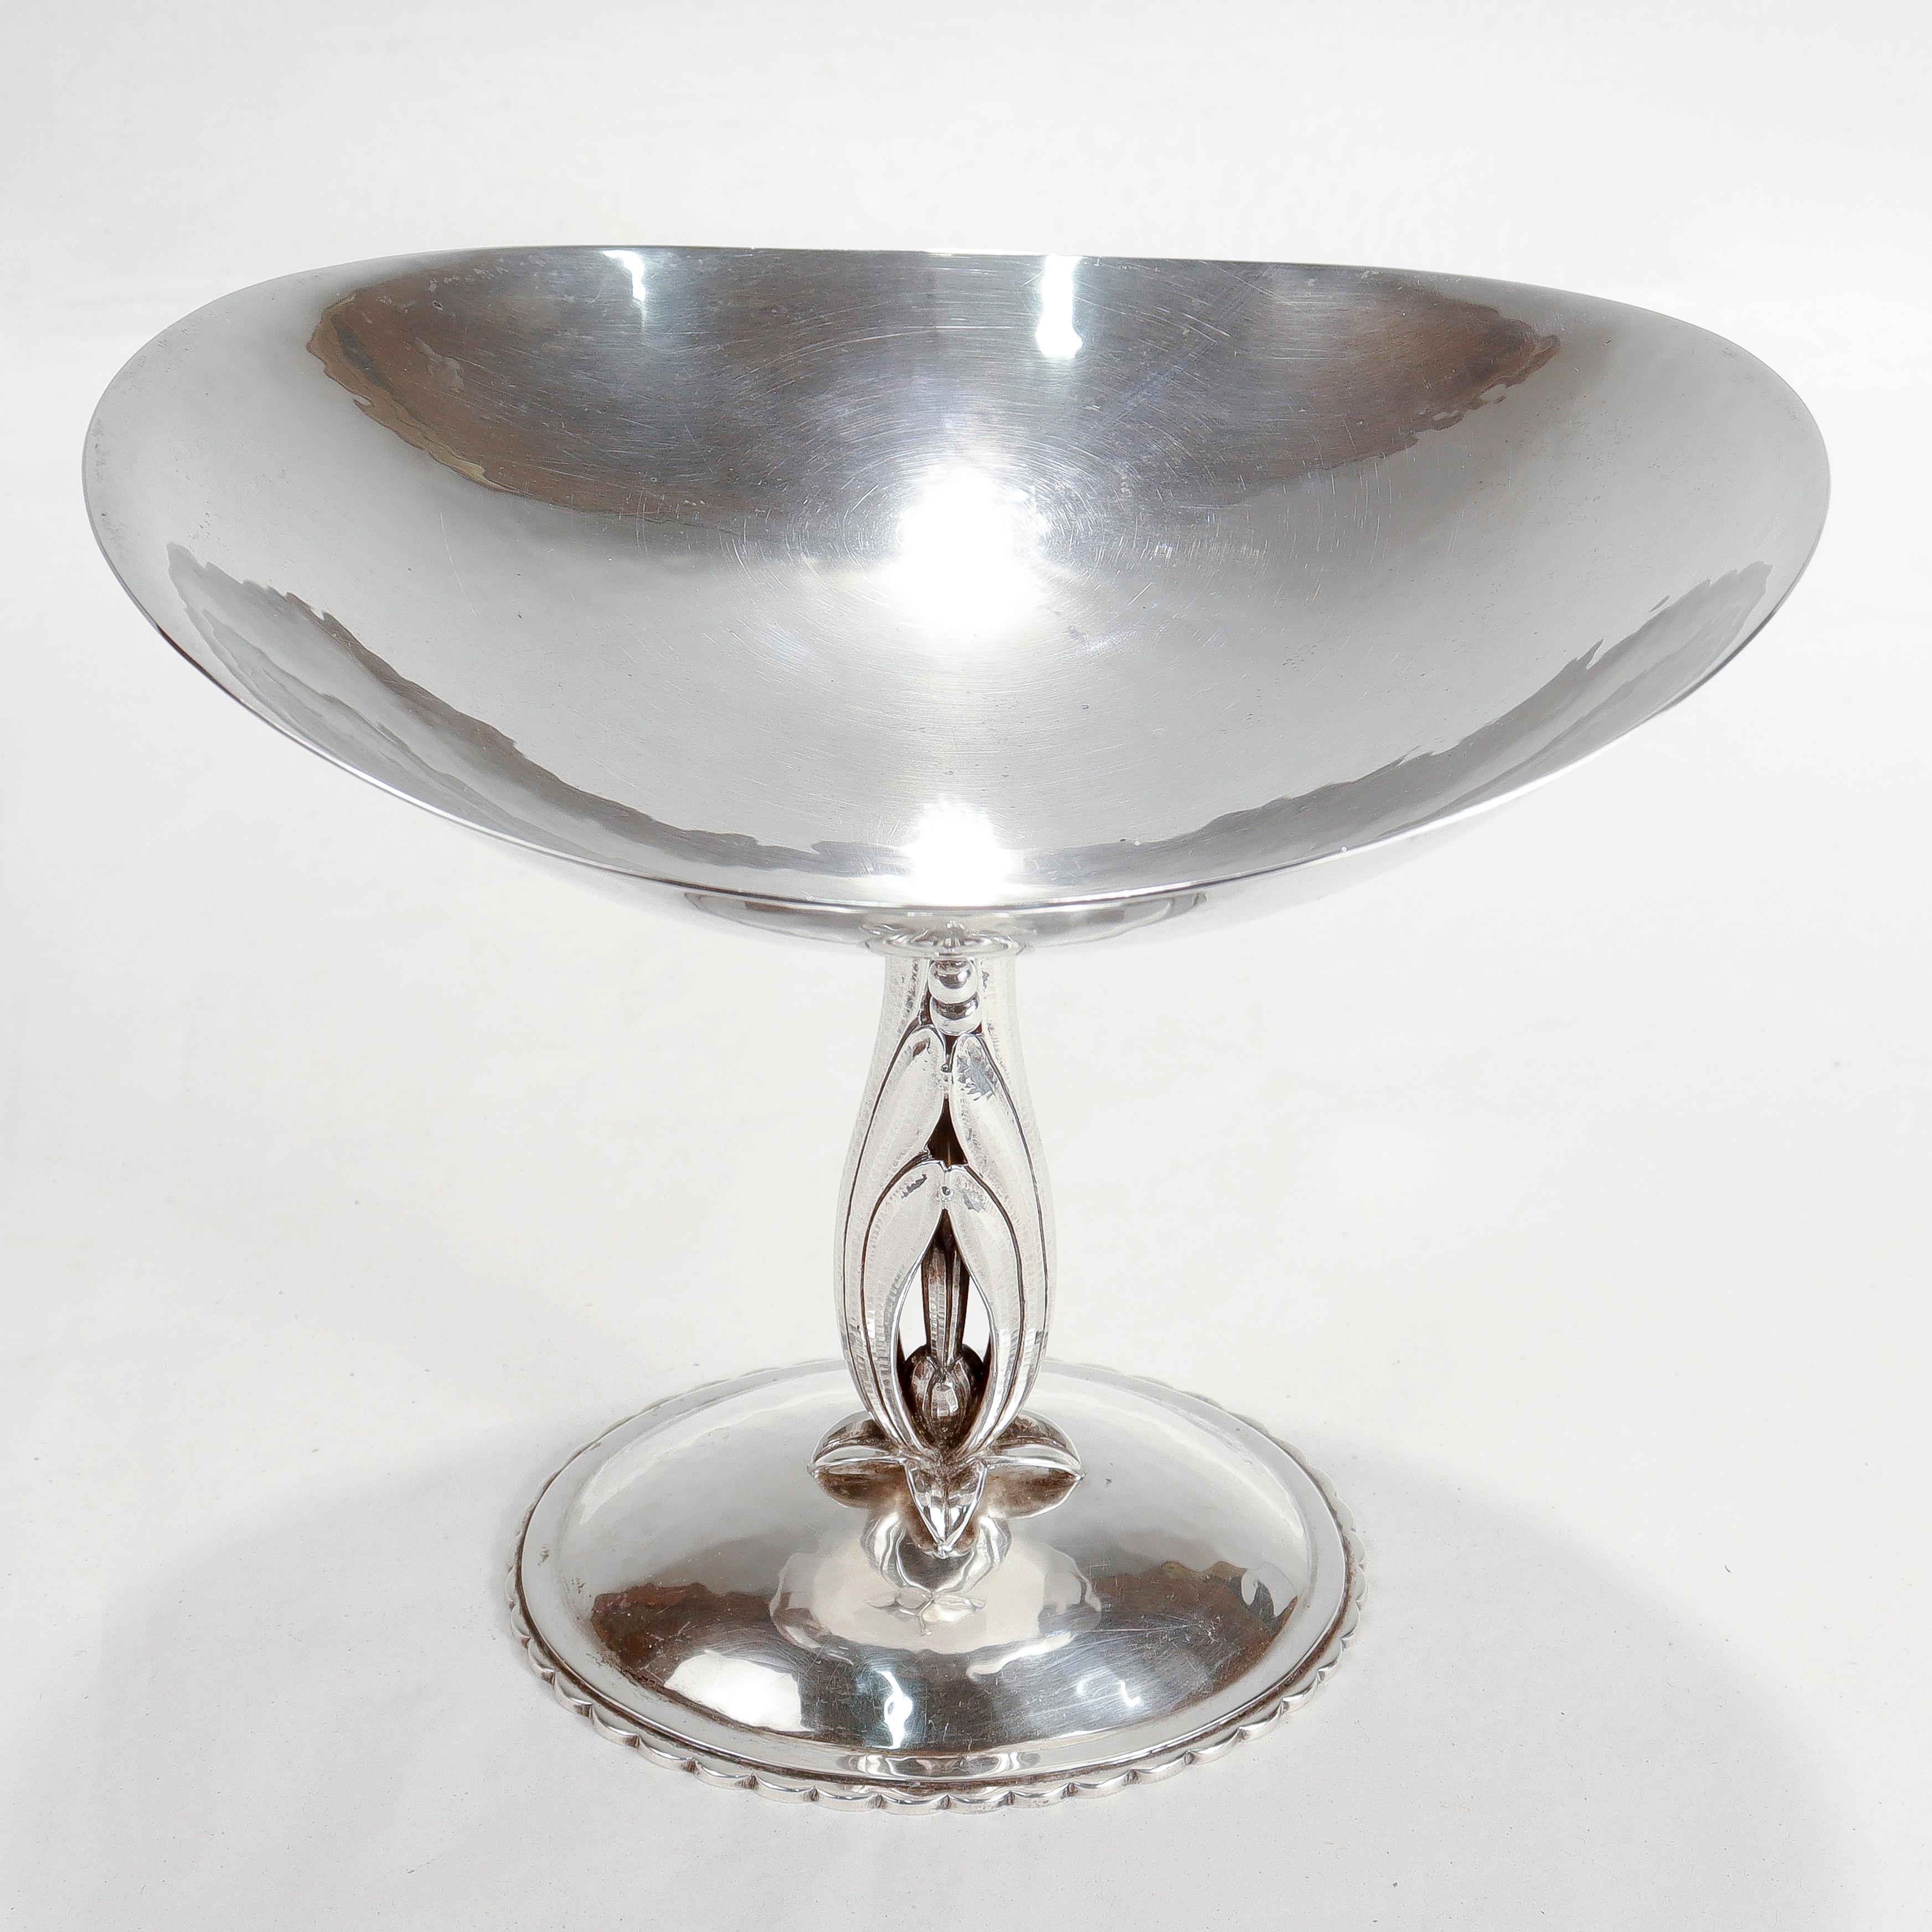 Signed Chicago Arts & Crafts Hand-Hammered Compote or Tazza by Cellini Craft 6